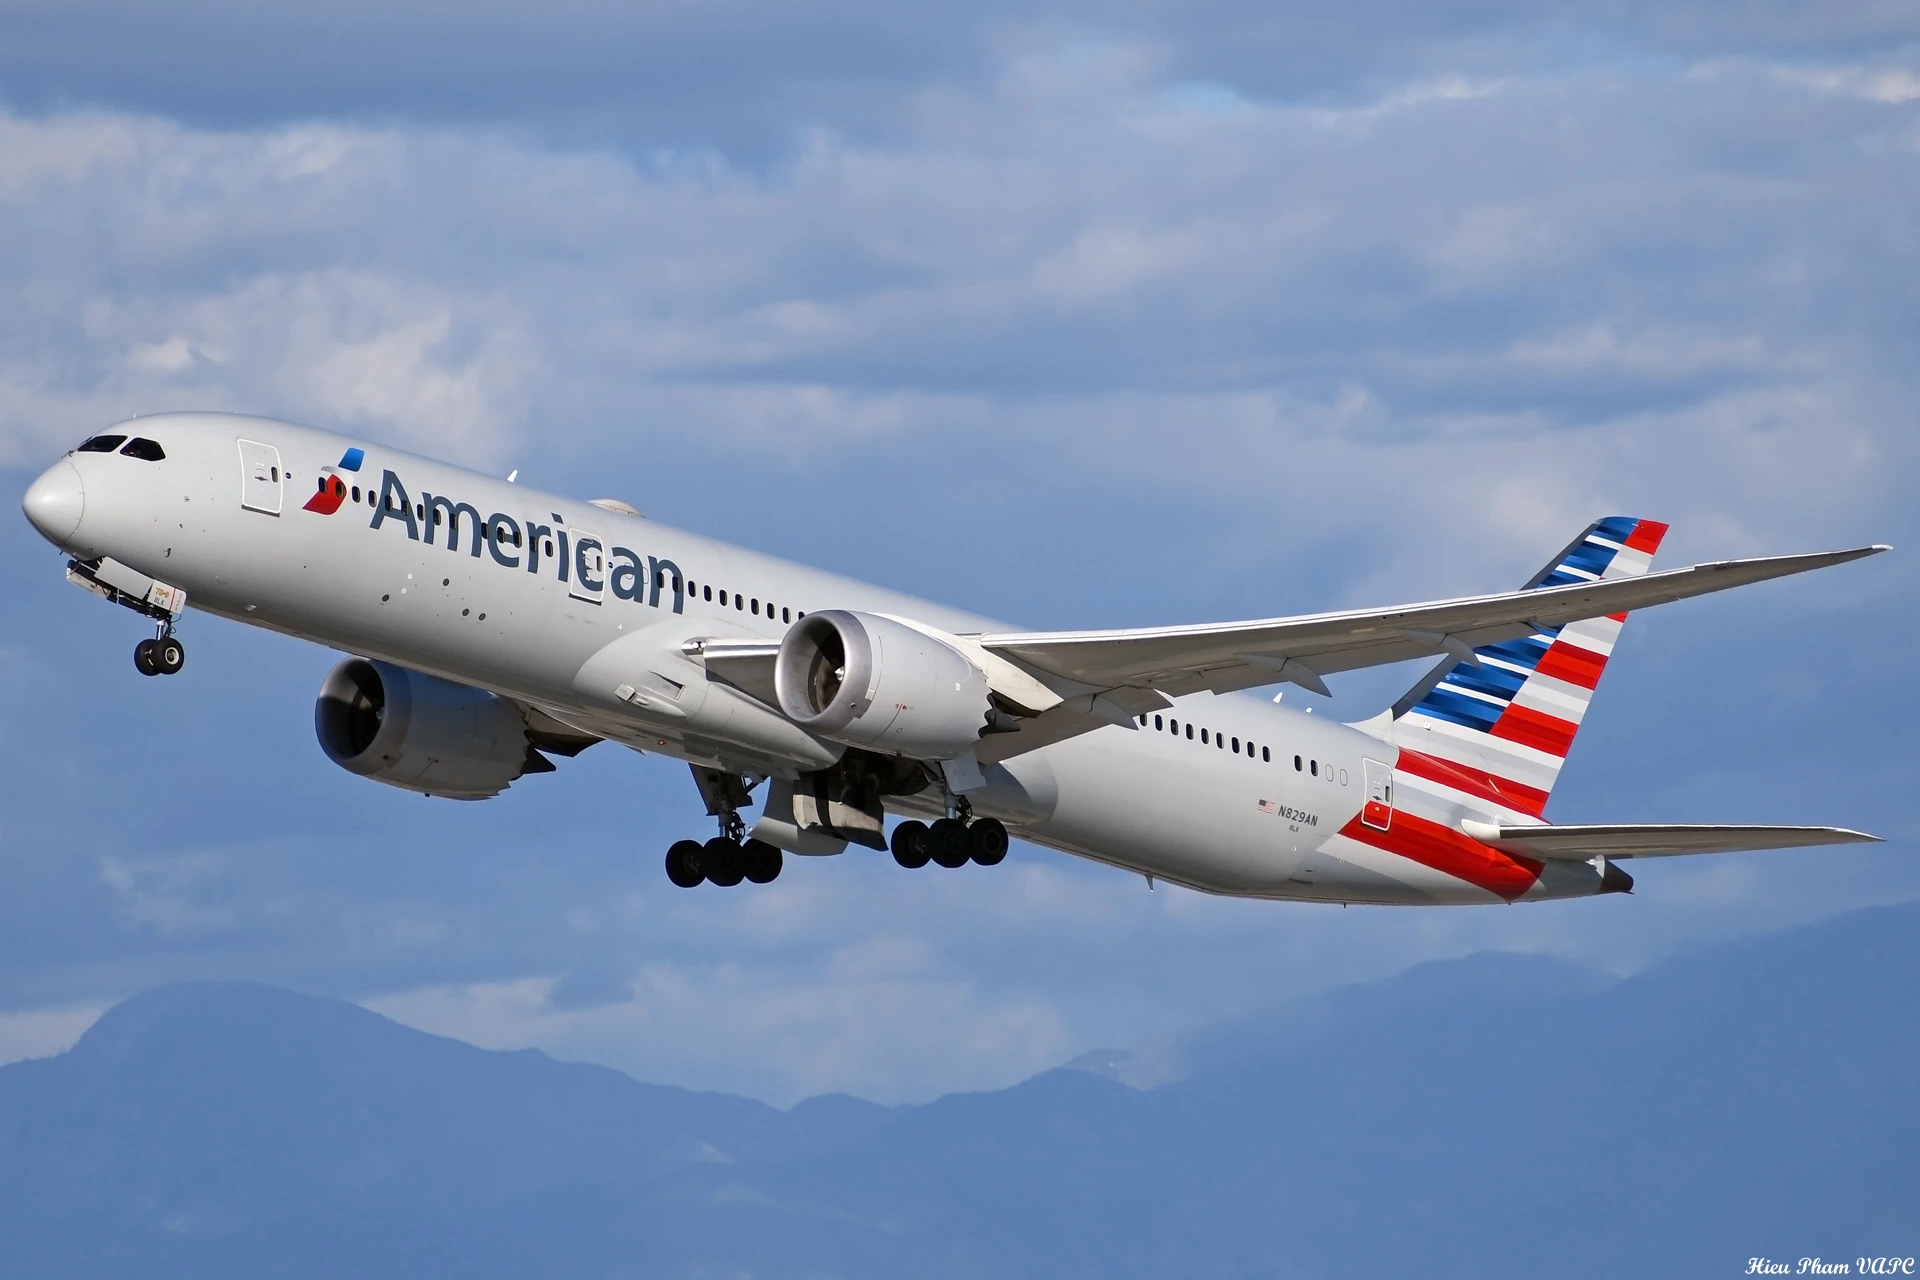 American Airlines Announce New Route to Philadelphia